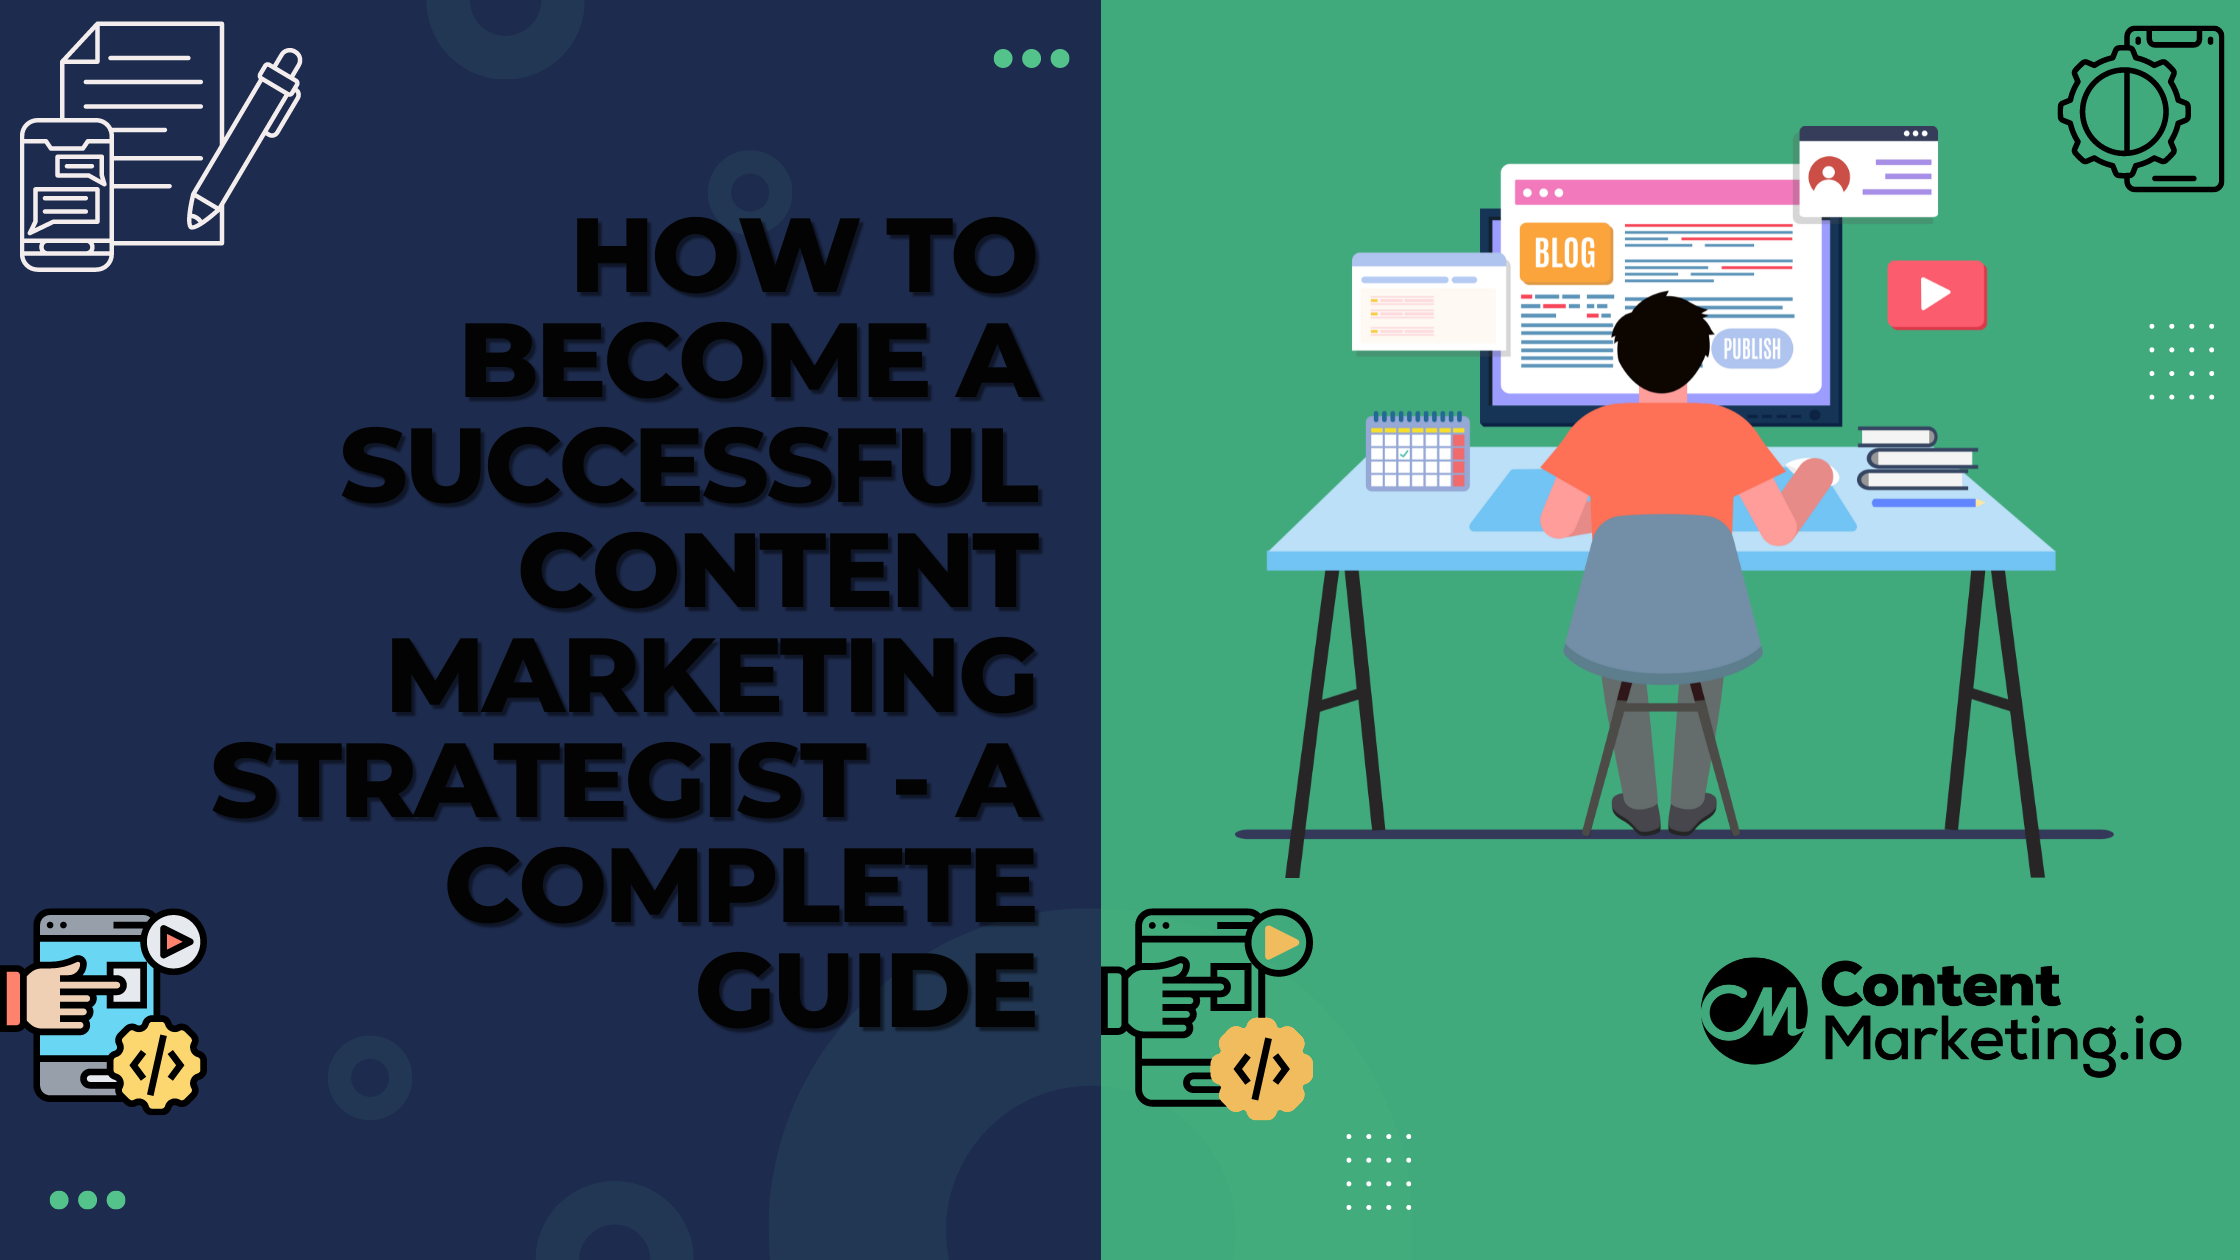 How to Become a Successful Content Marketing Strategist - A Complete Guide